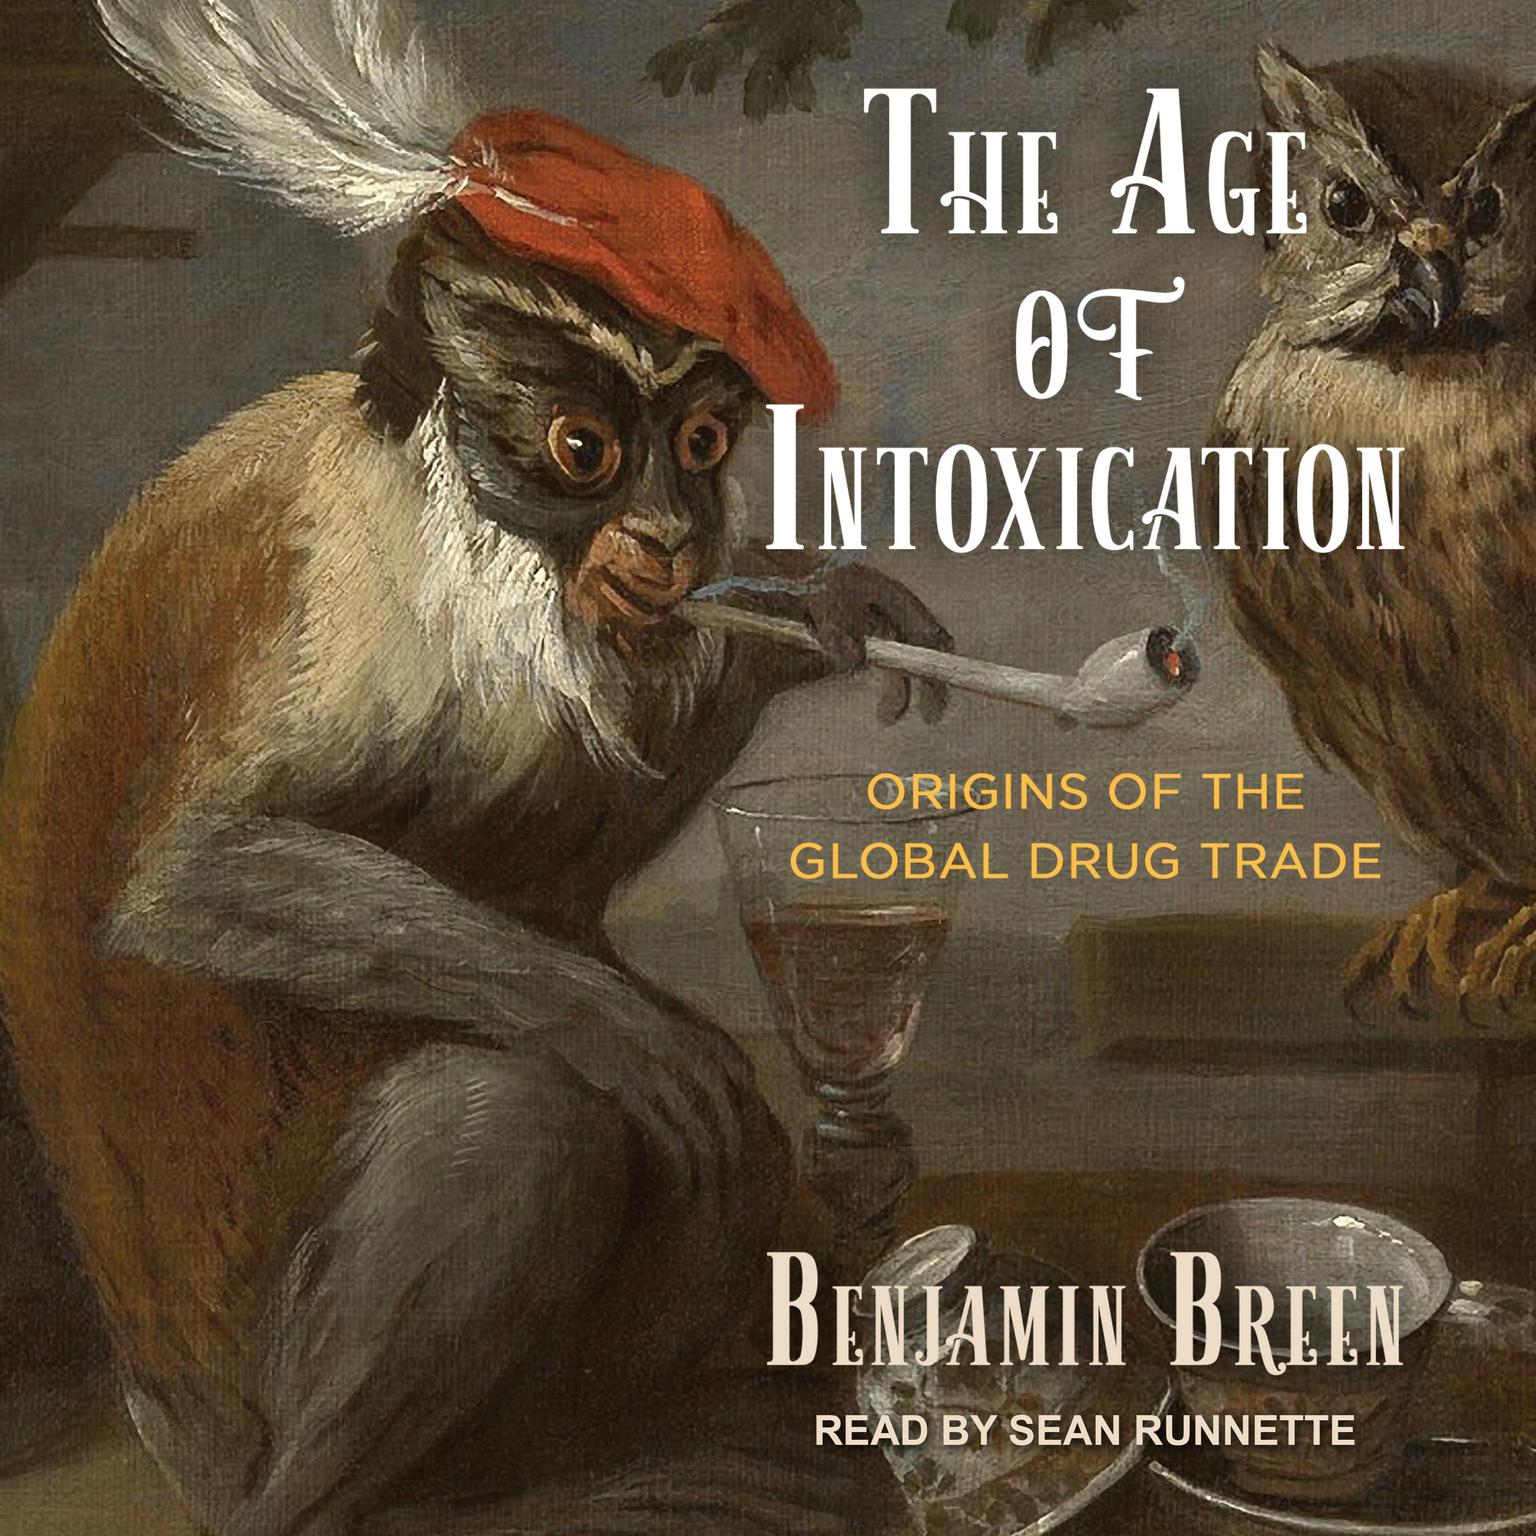 The Age of Intoxication: Origins of the Global Drug Trade Audiobook, by Benjamin Breen